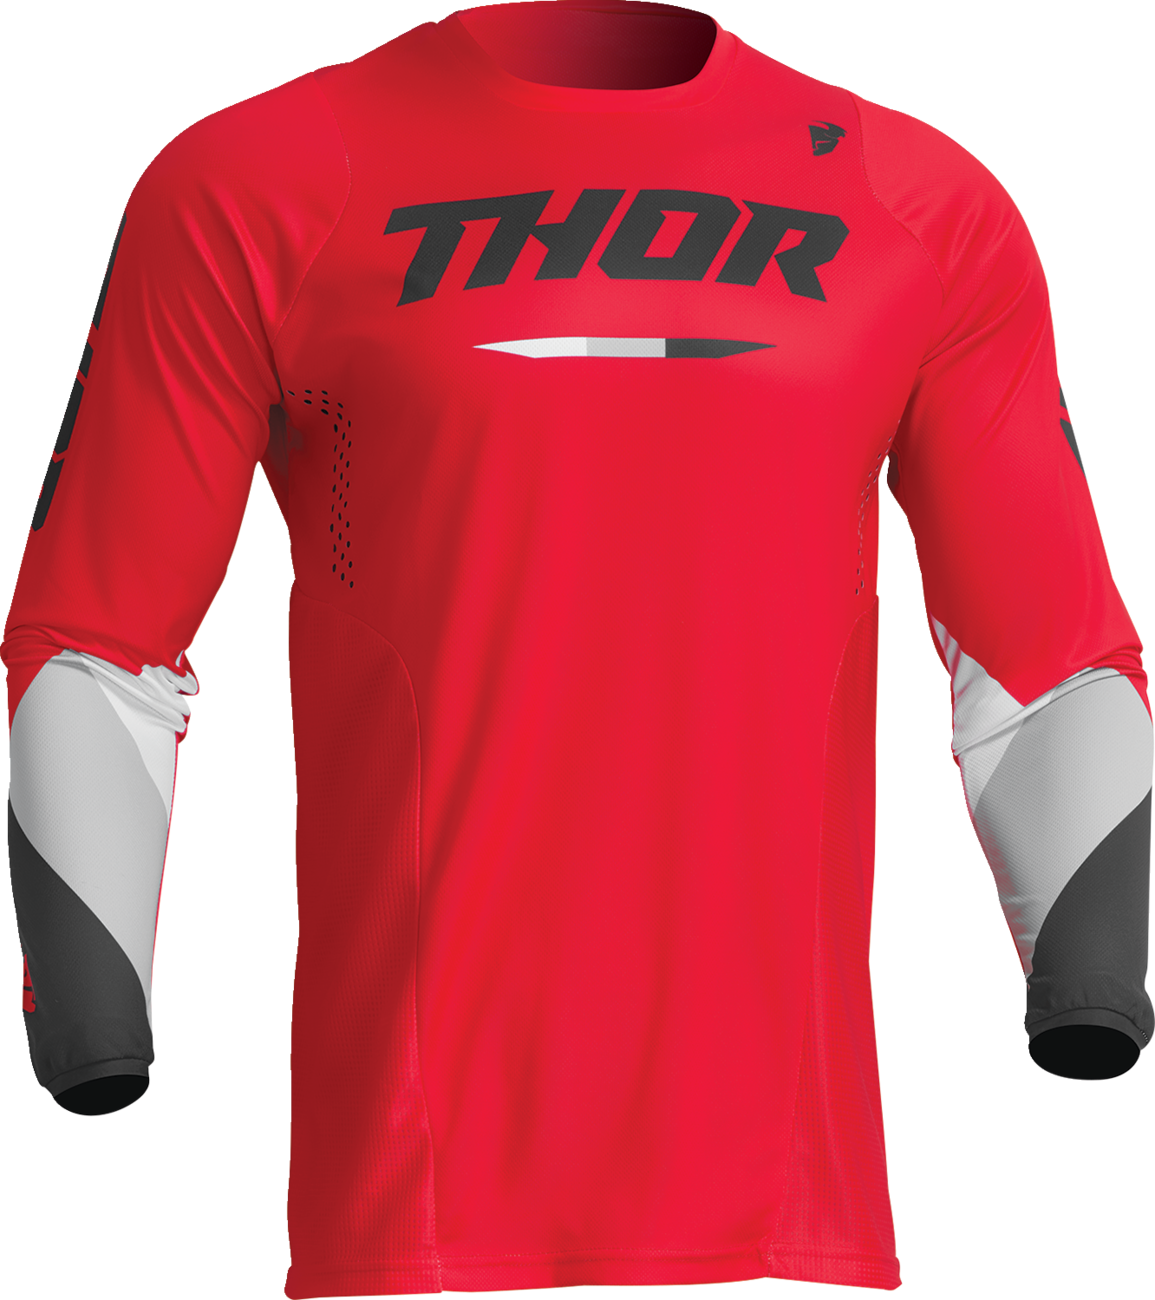 THOR Youth Pulse Tactic Jersey - Red - Large 2912-2207